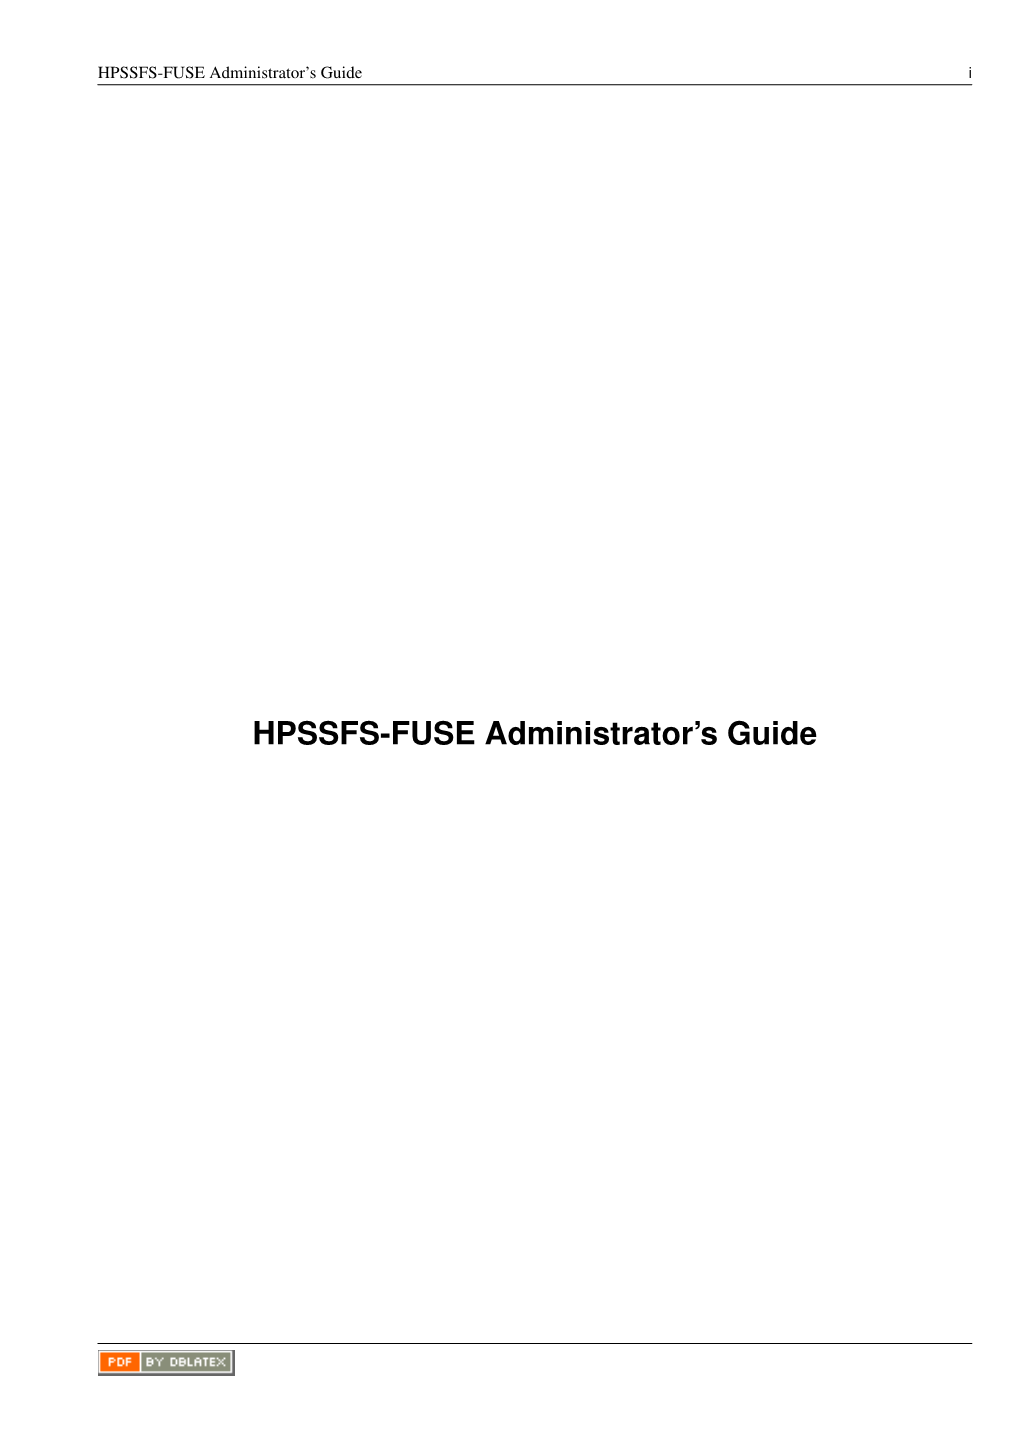 HPSSFS-FUSE Administrator's Guide